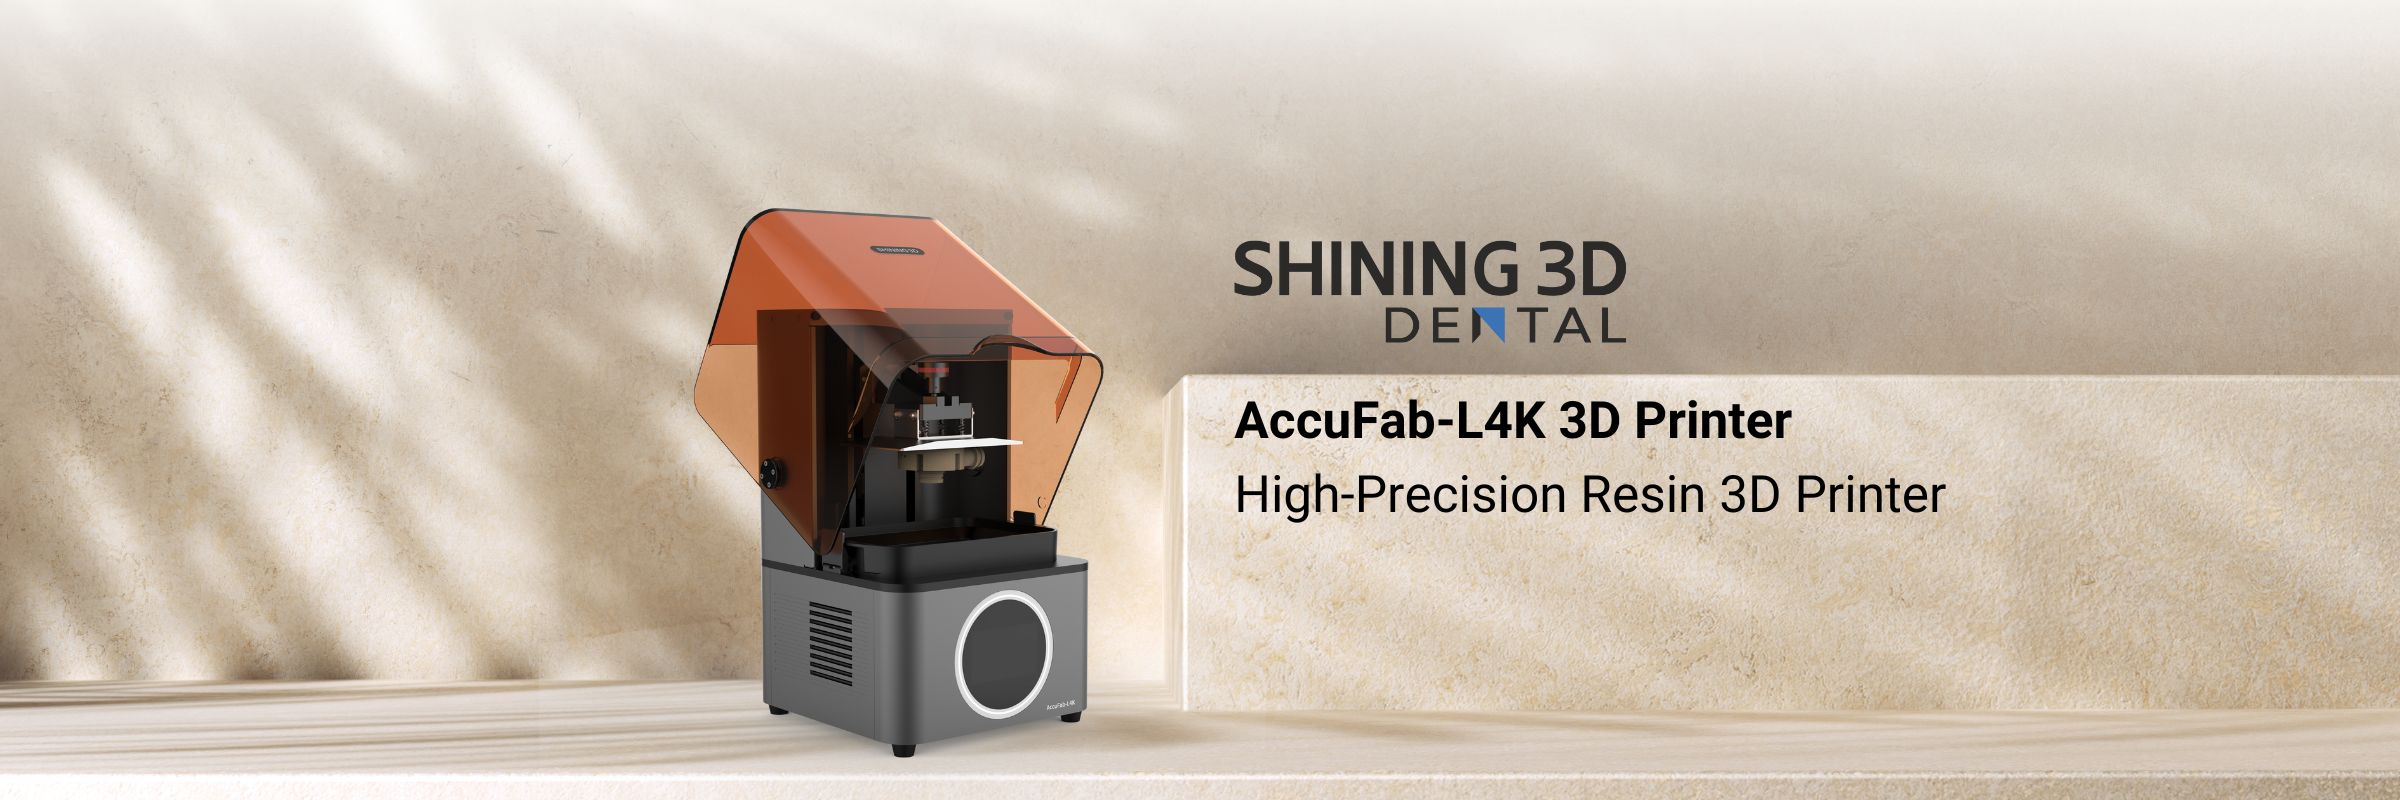 Shining 3D AccuFab L4K 3D Printer Product Page Banner